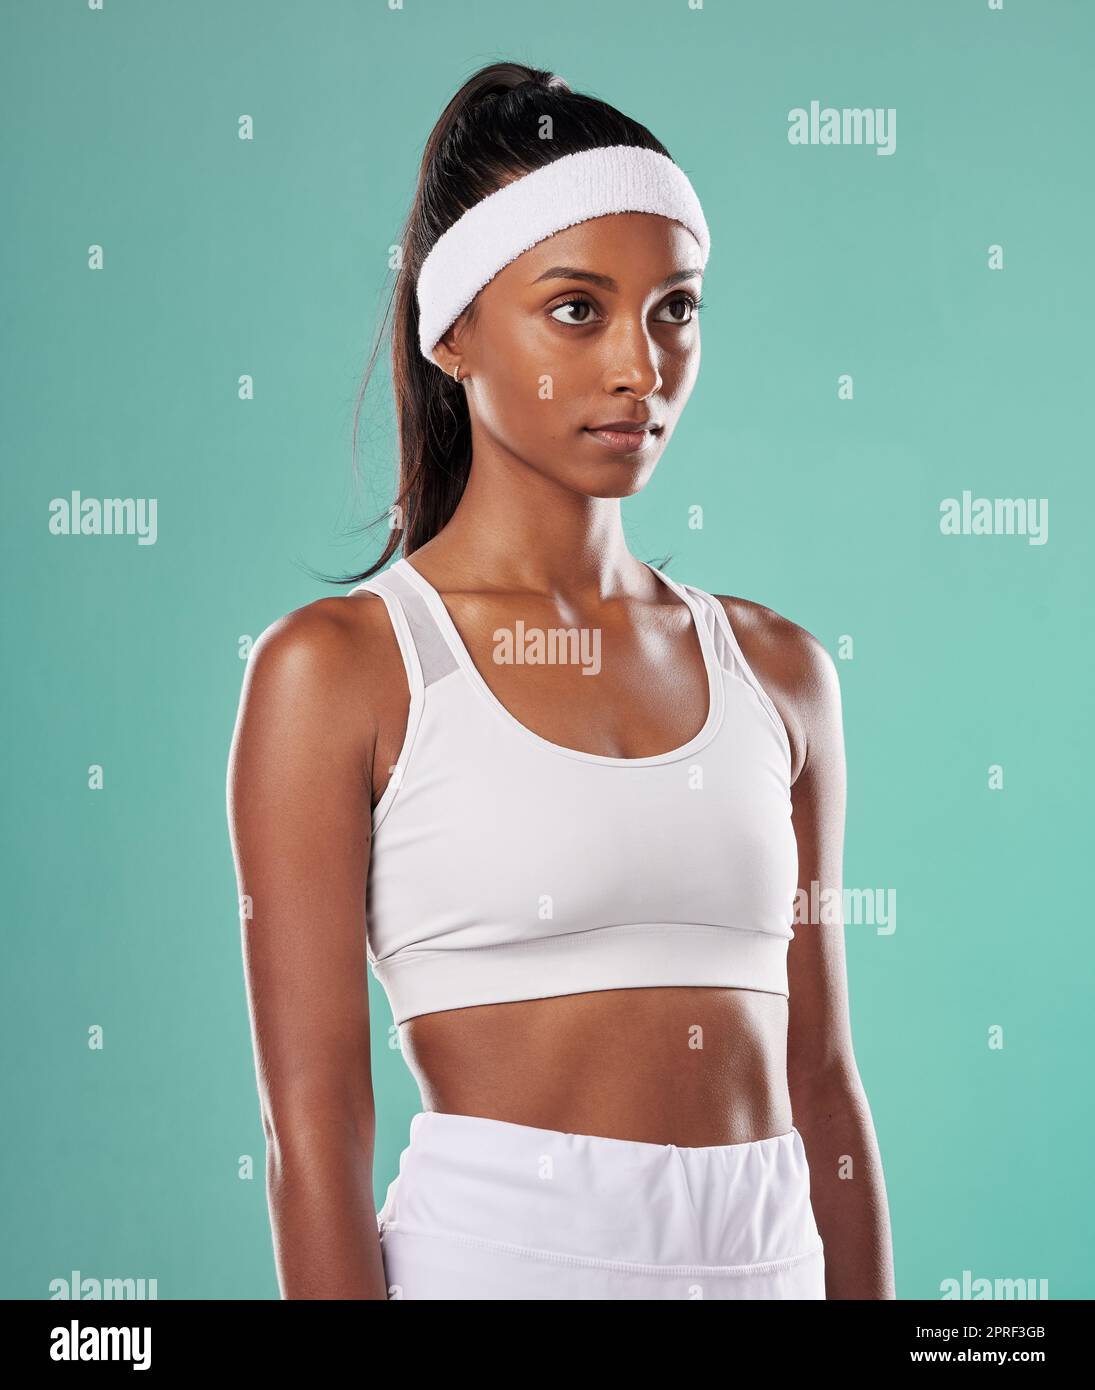 Black female tennis, badminton or squash player standing, relax and cool before competition, tournament and game or match. Athletic and fit African American sports woman with professional sportswear Stock Photo